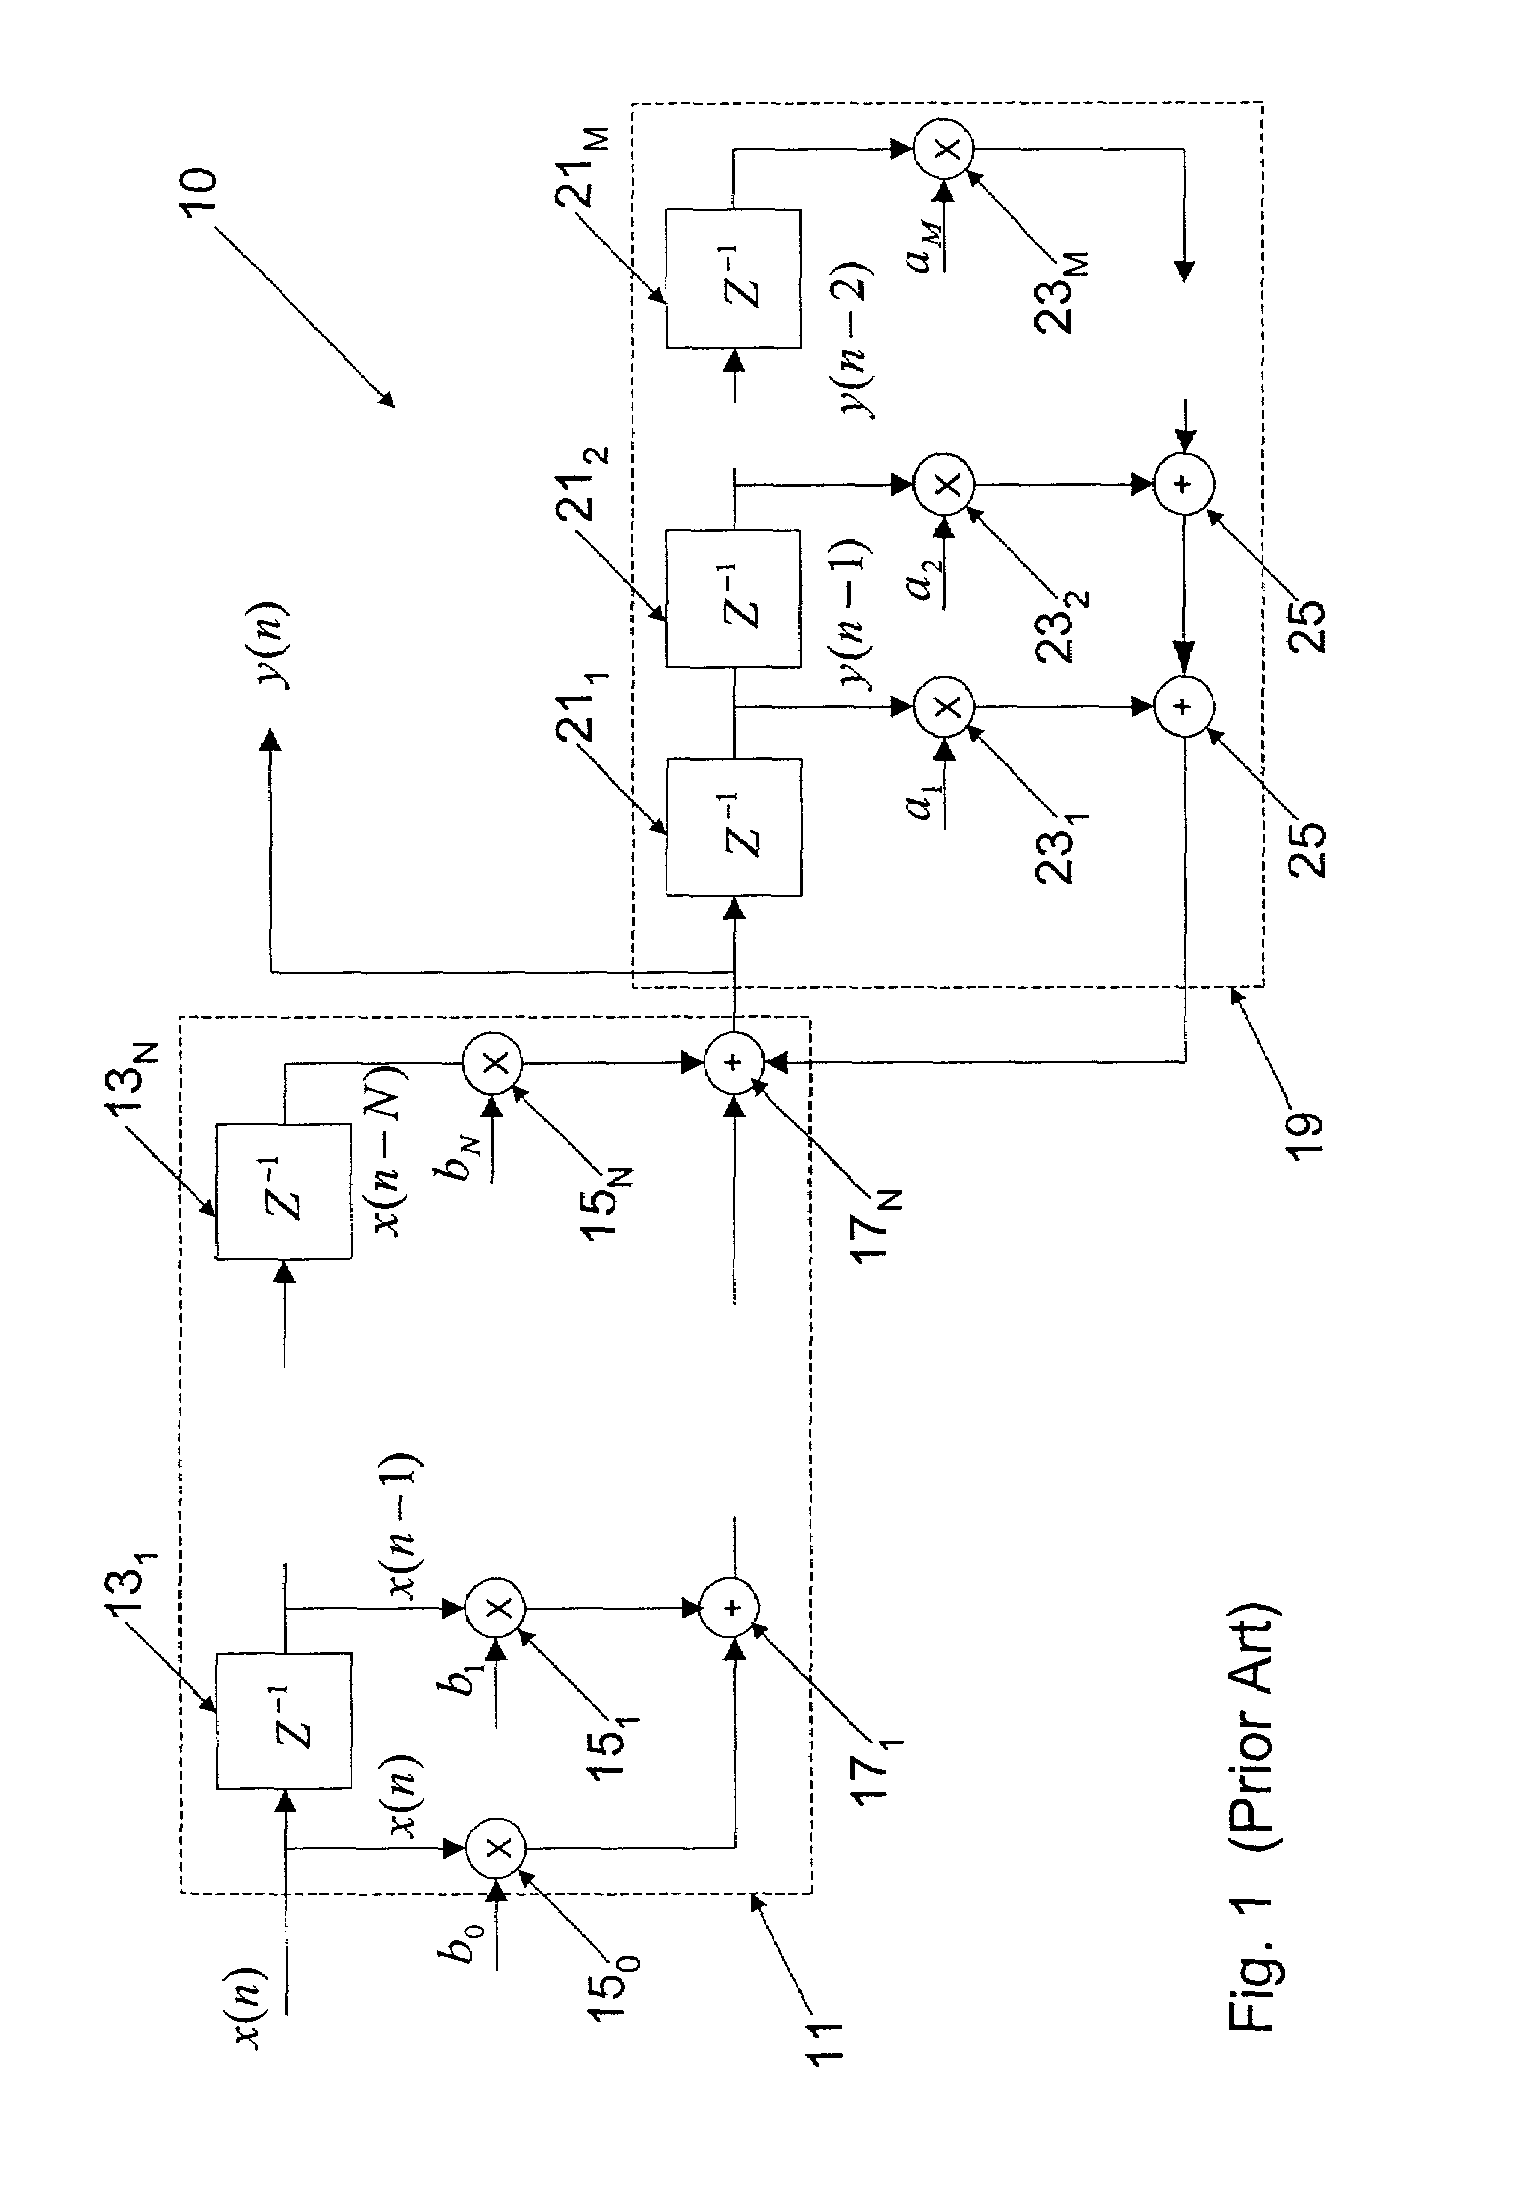 Implementation of digital filter with reduced hardware